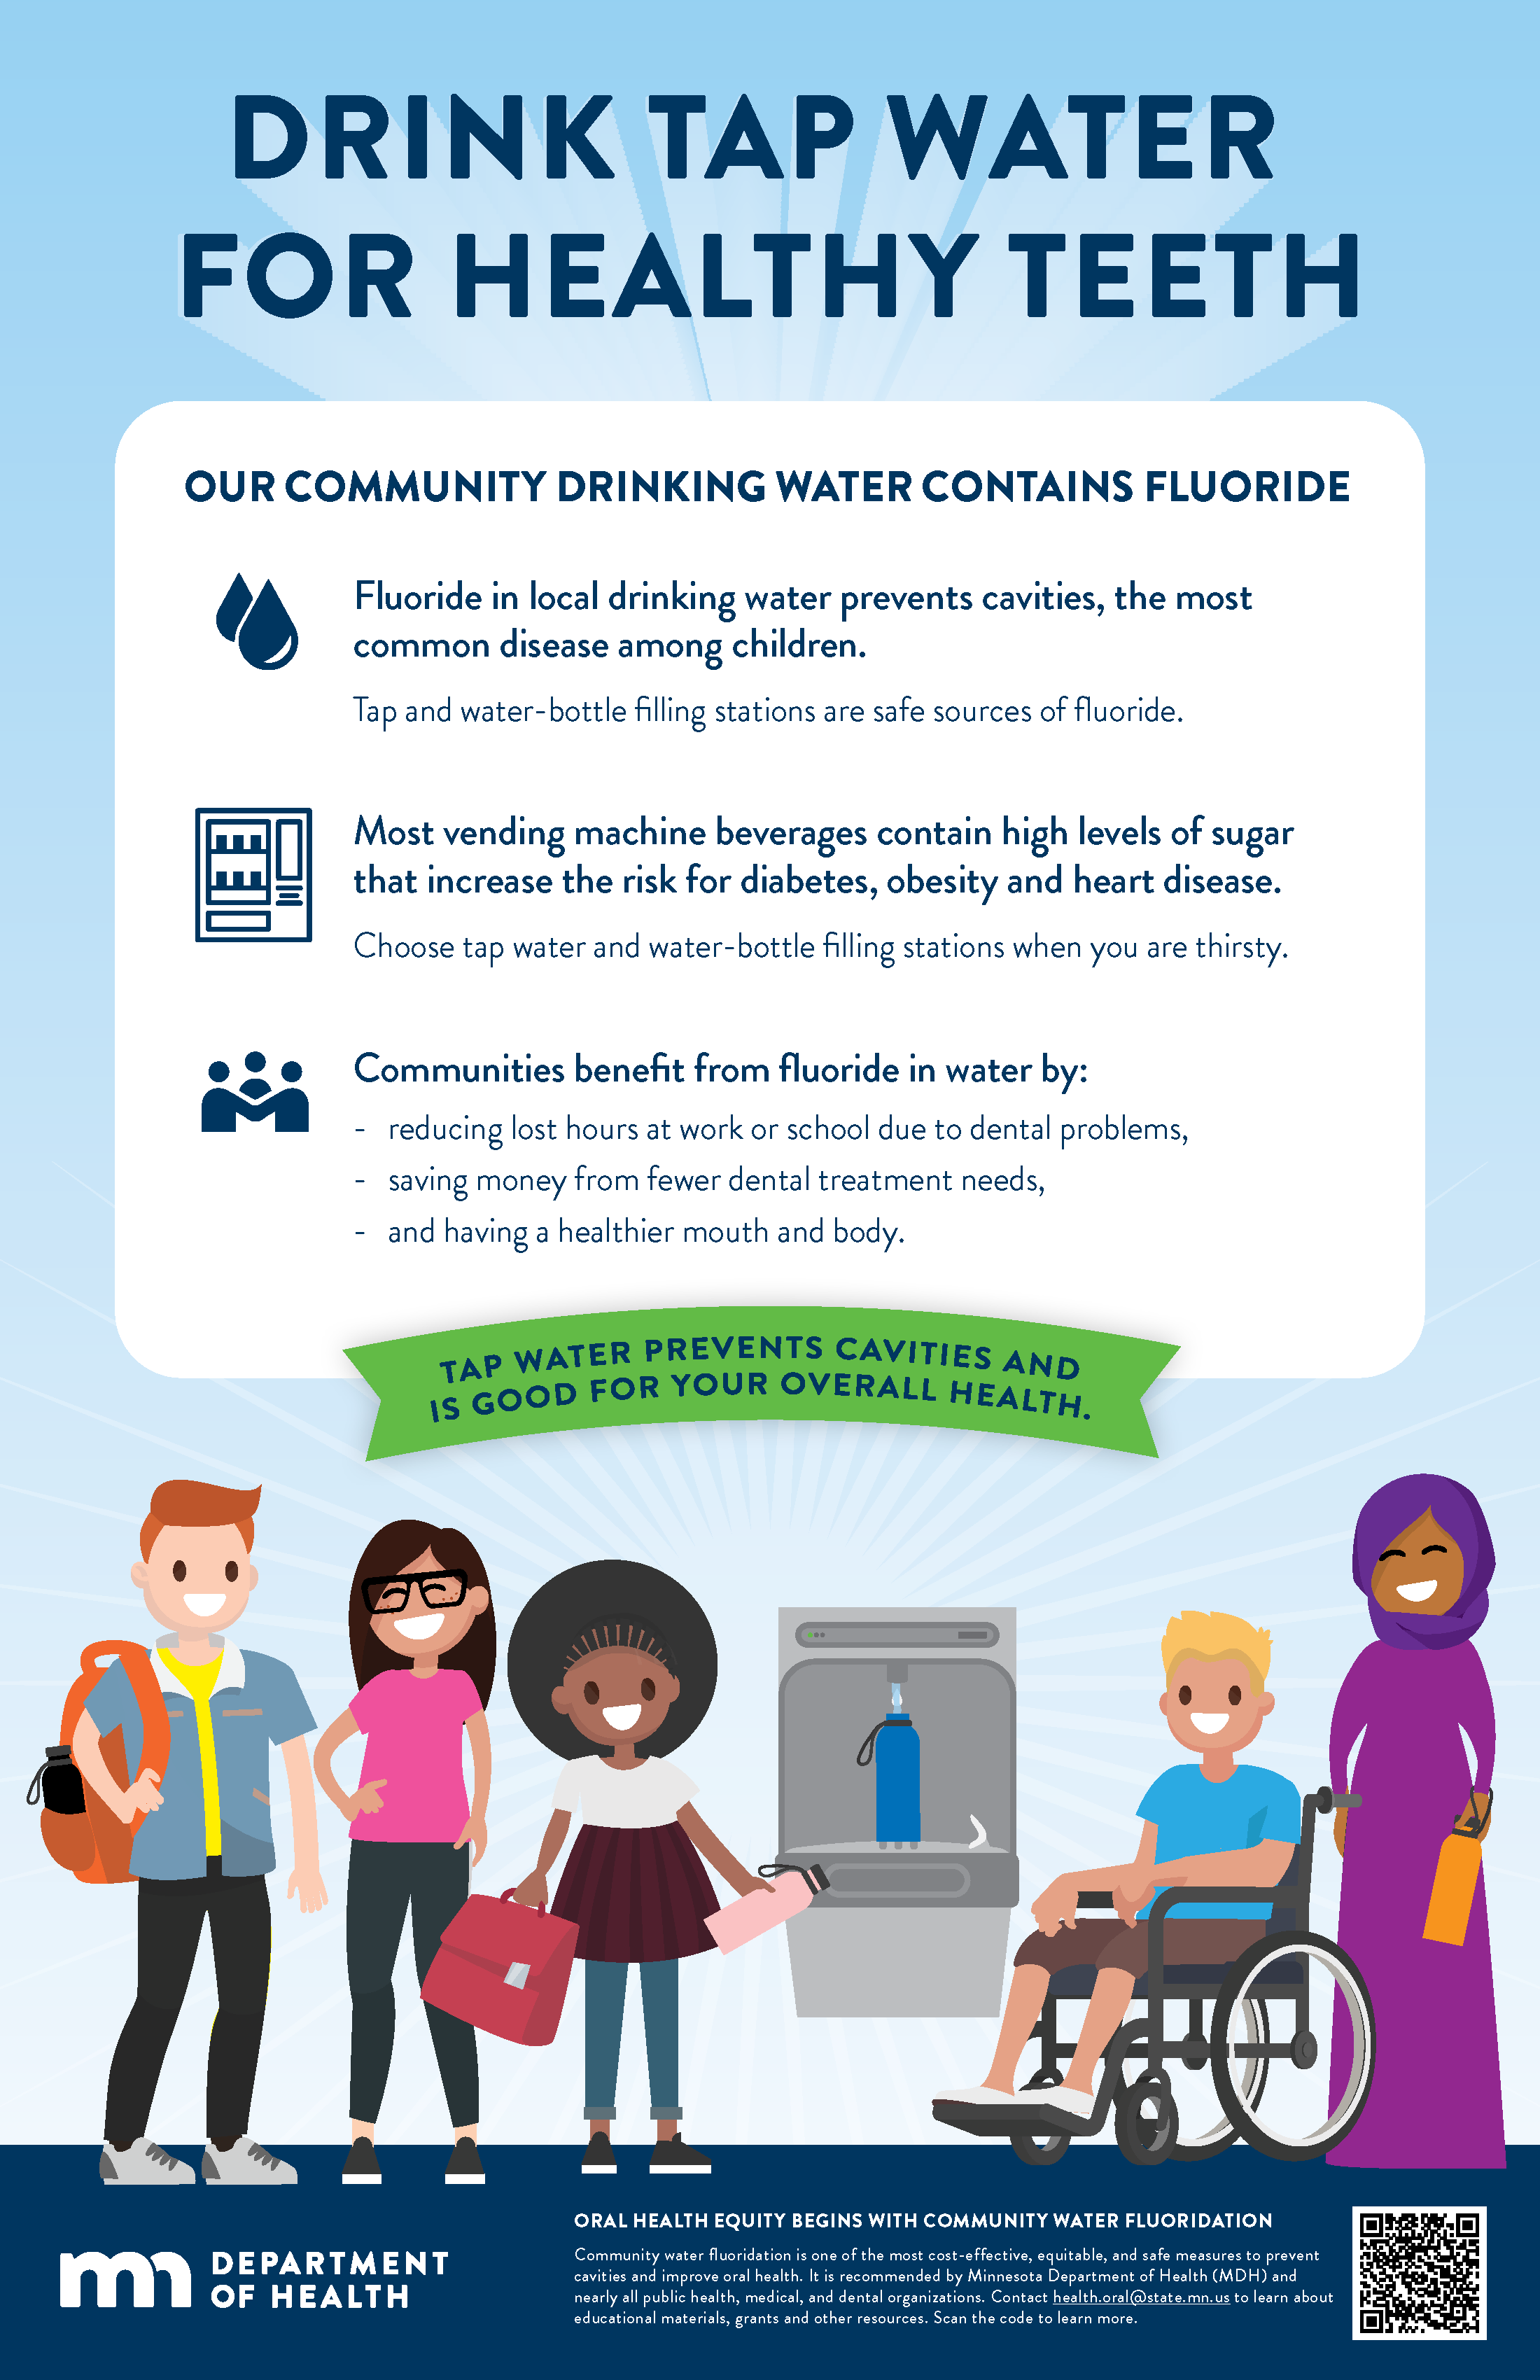 Poster for schools arbout the importance of drinking flouridated water for oral health and community benefits.